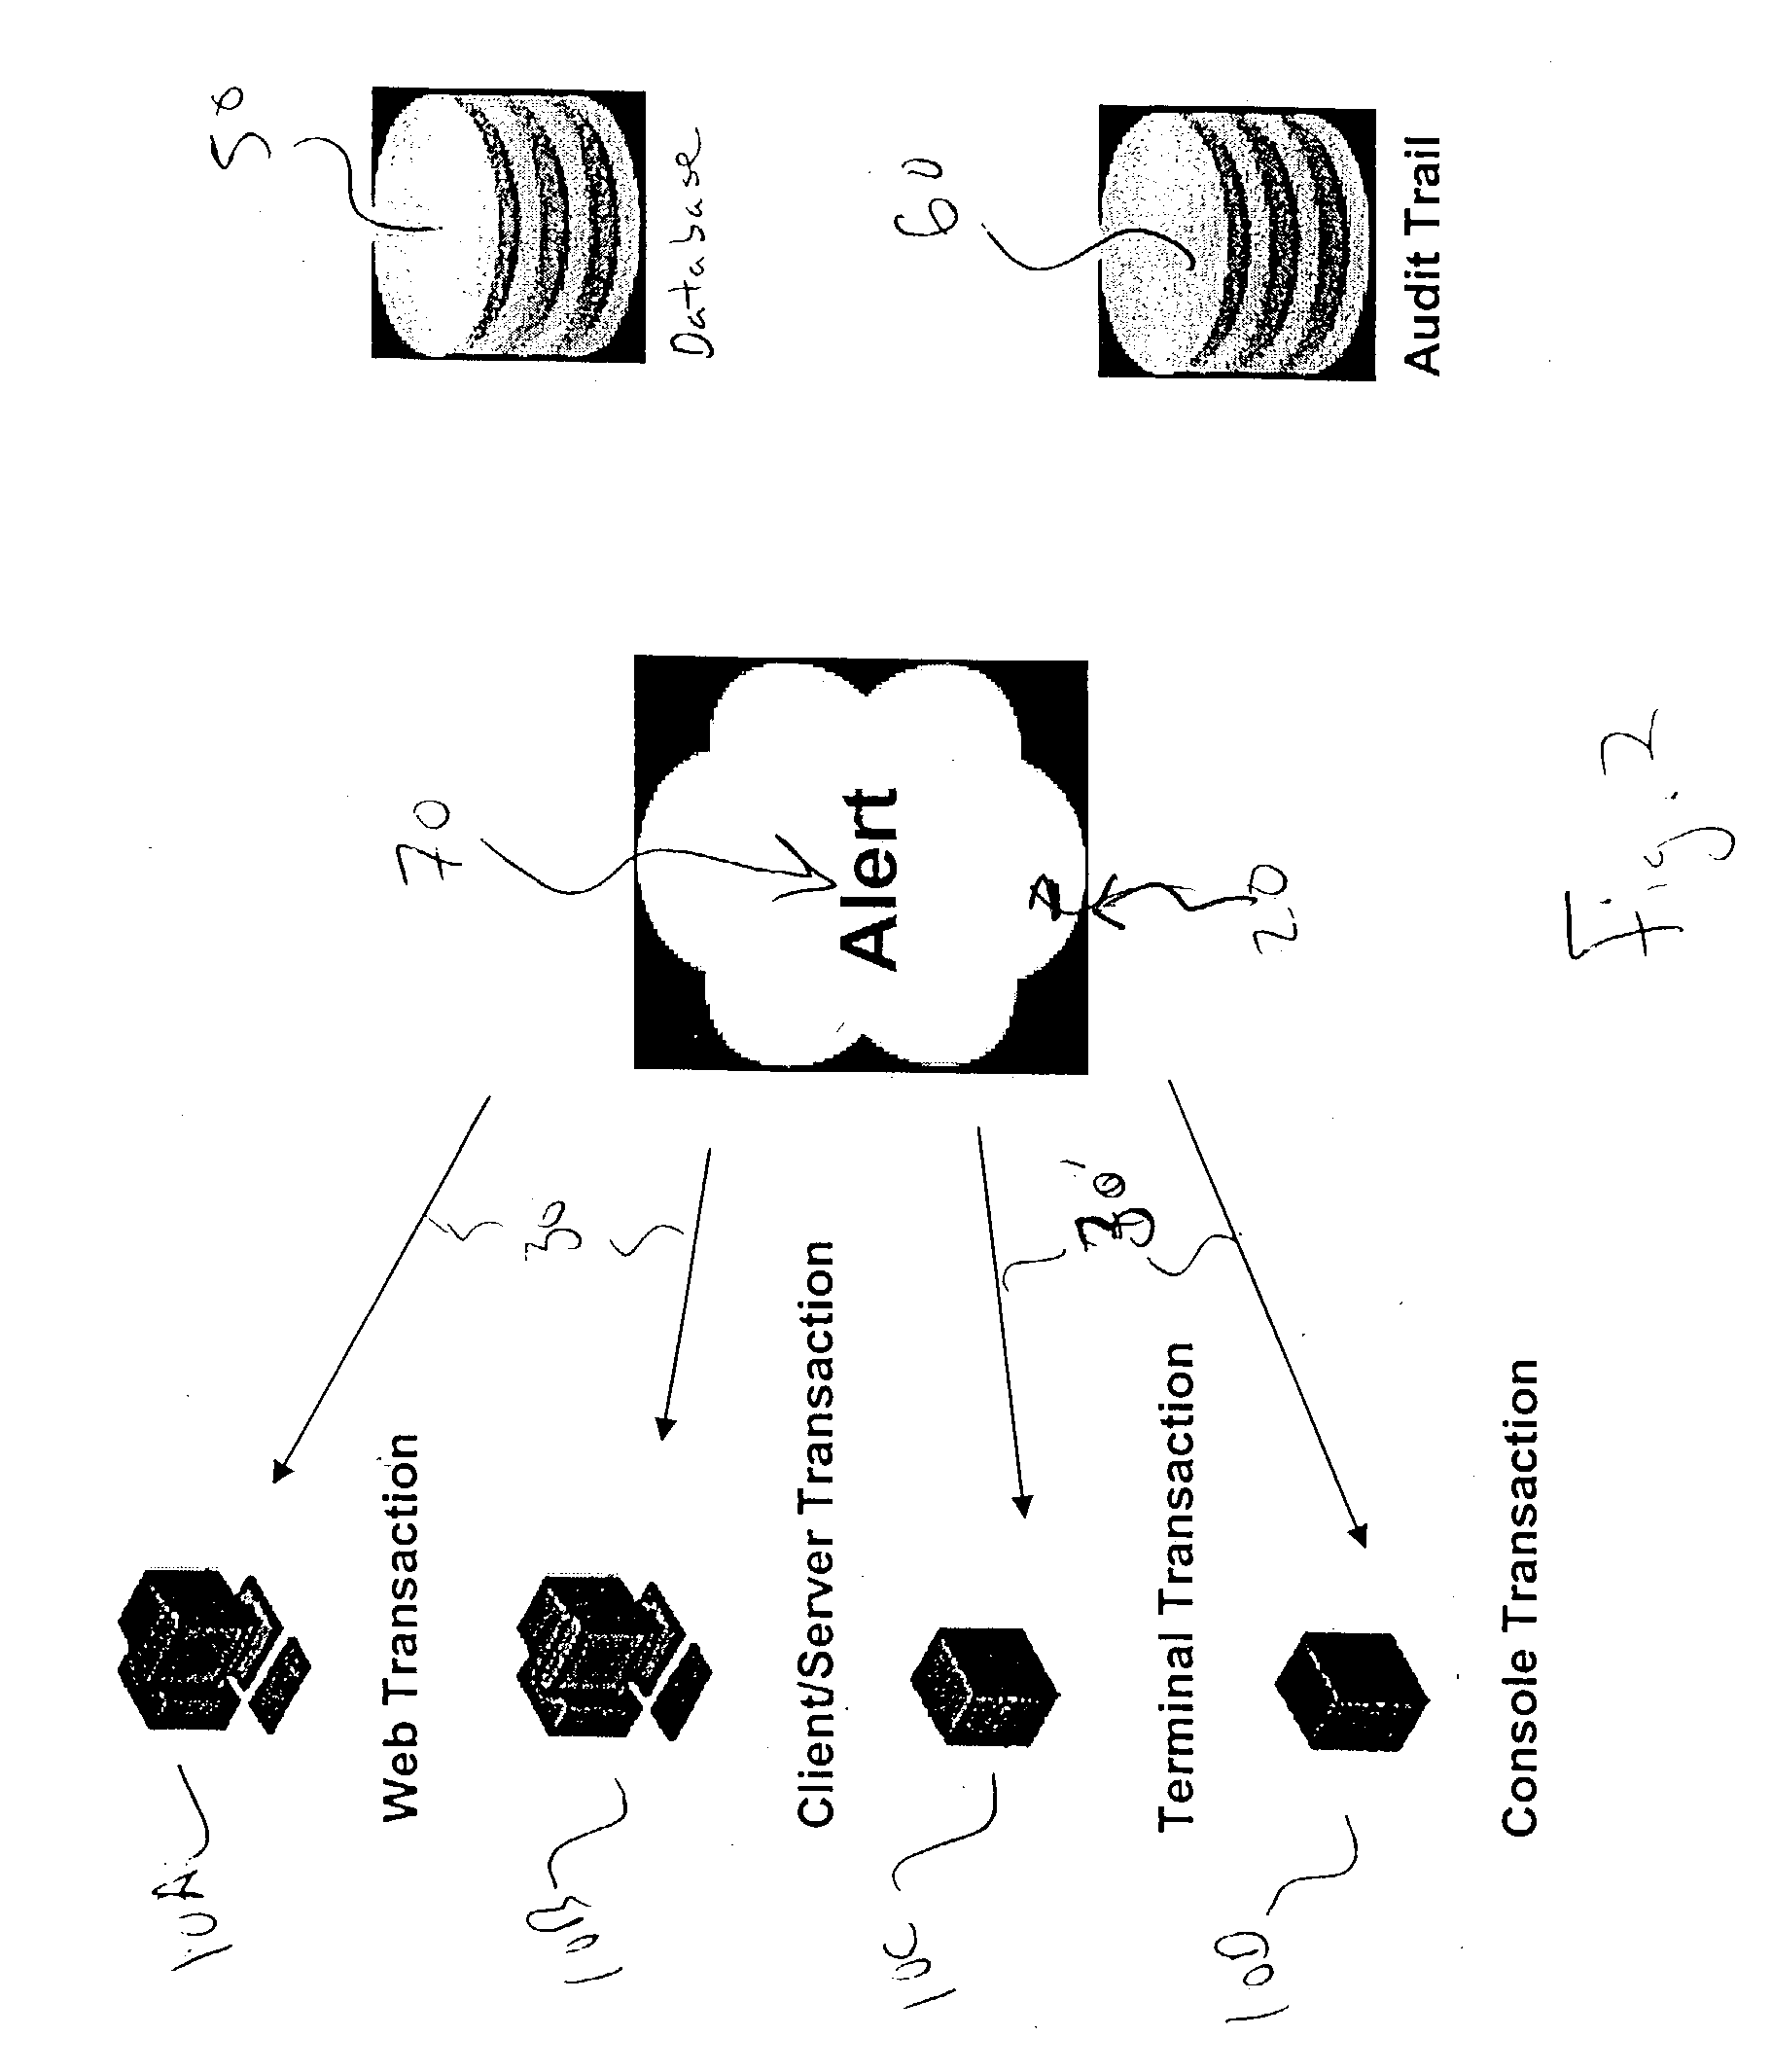 Non-intrusive, automated upgrading of electronic records